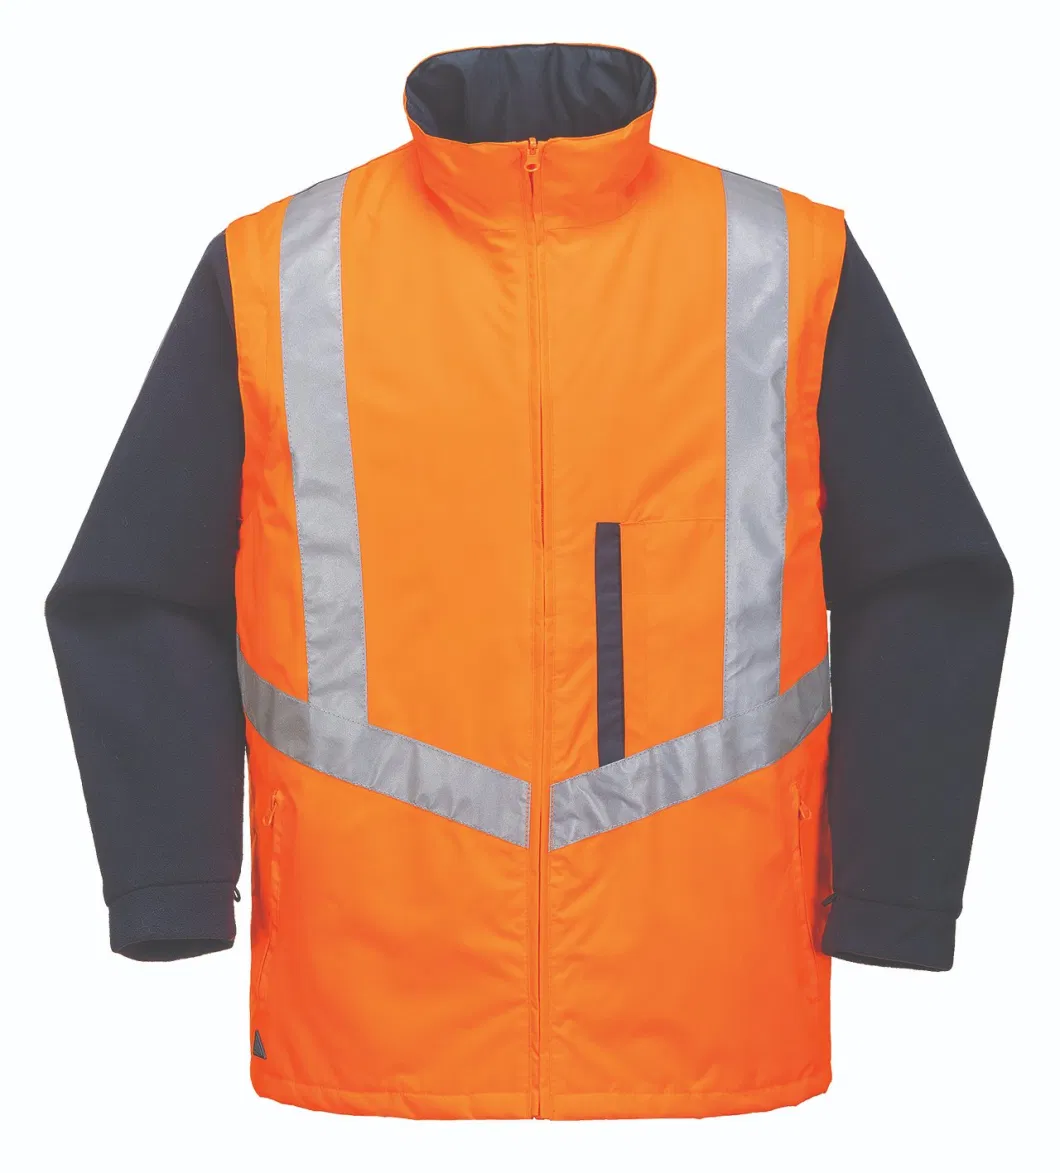 Wholesale High Visibility Waterproof Winter Work Jacket Fire Resistant Anti-Static Clothing